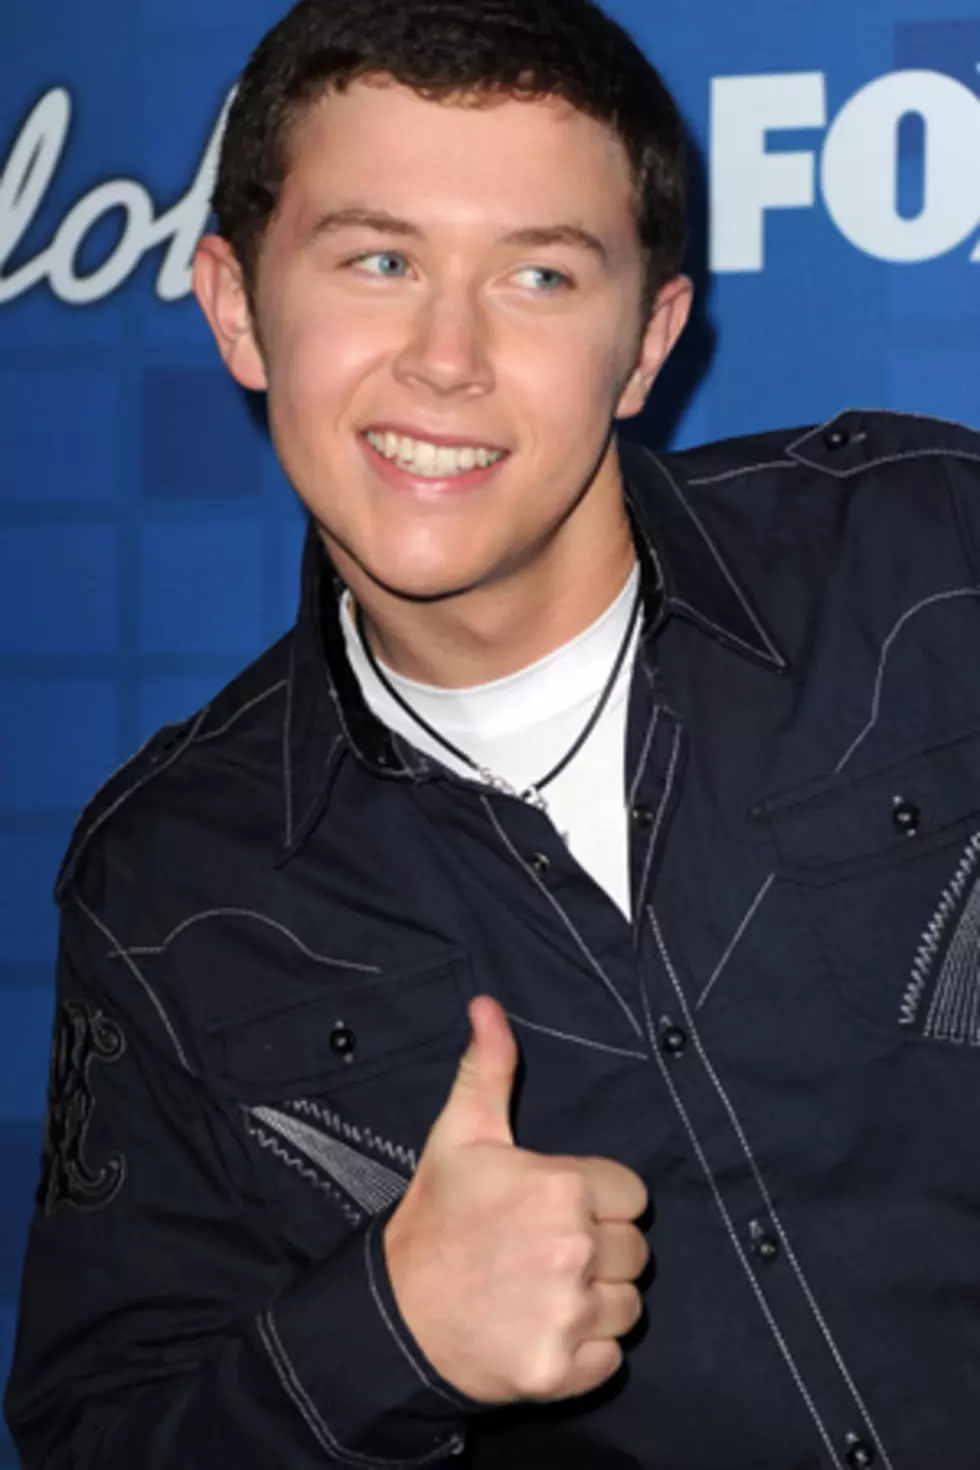 Scotty McCreery’s Longtime Friend Recalls ‘Mini Elvis Concerts’ During Their School Bus Days